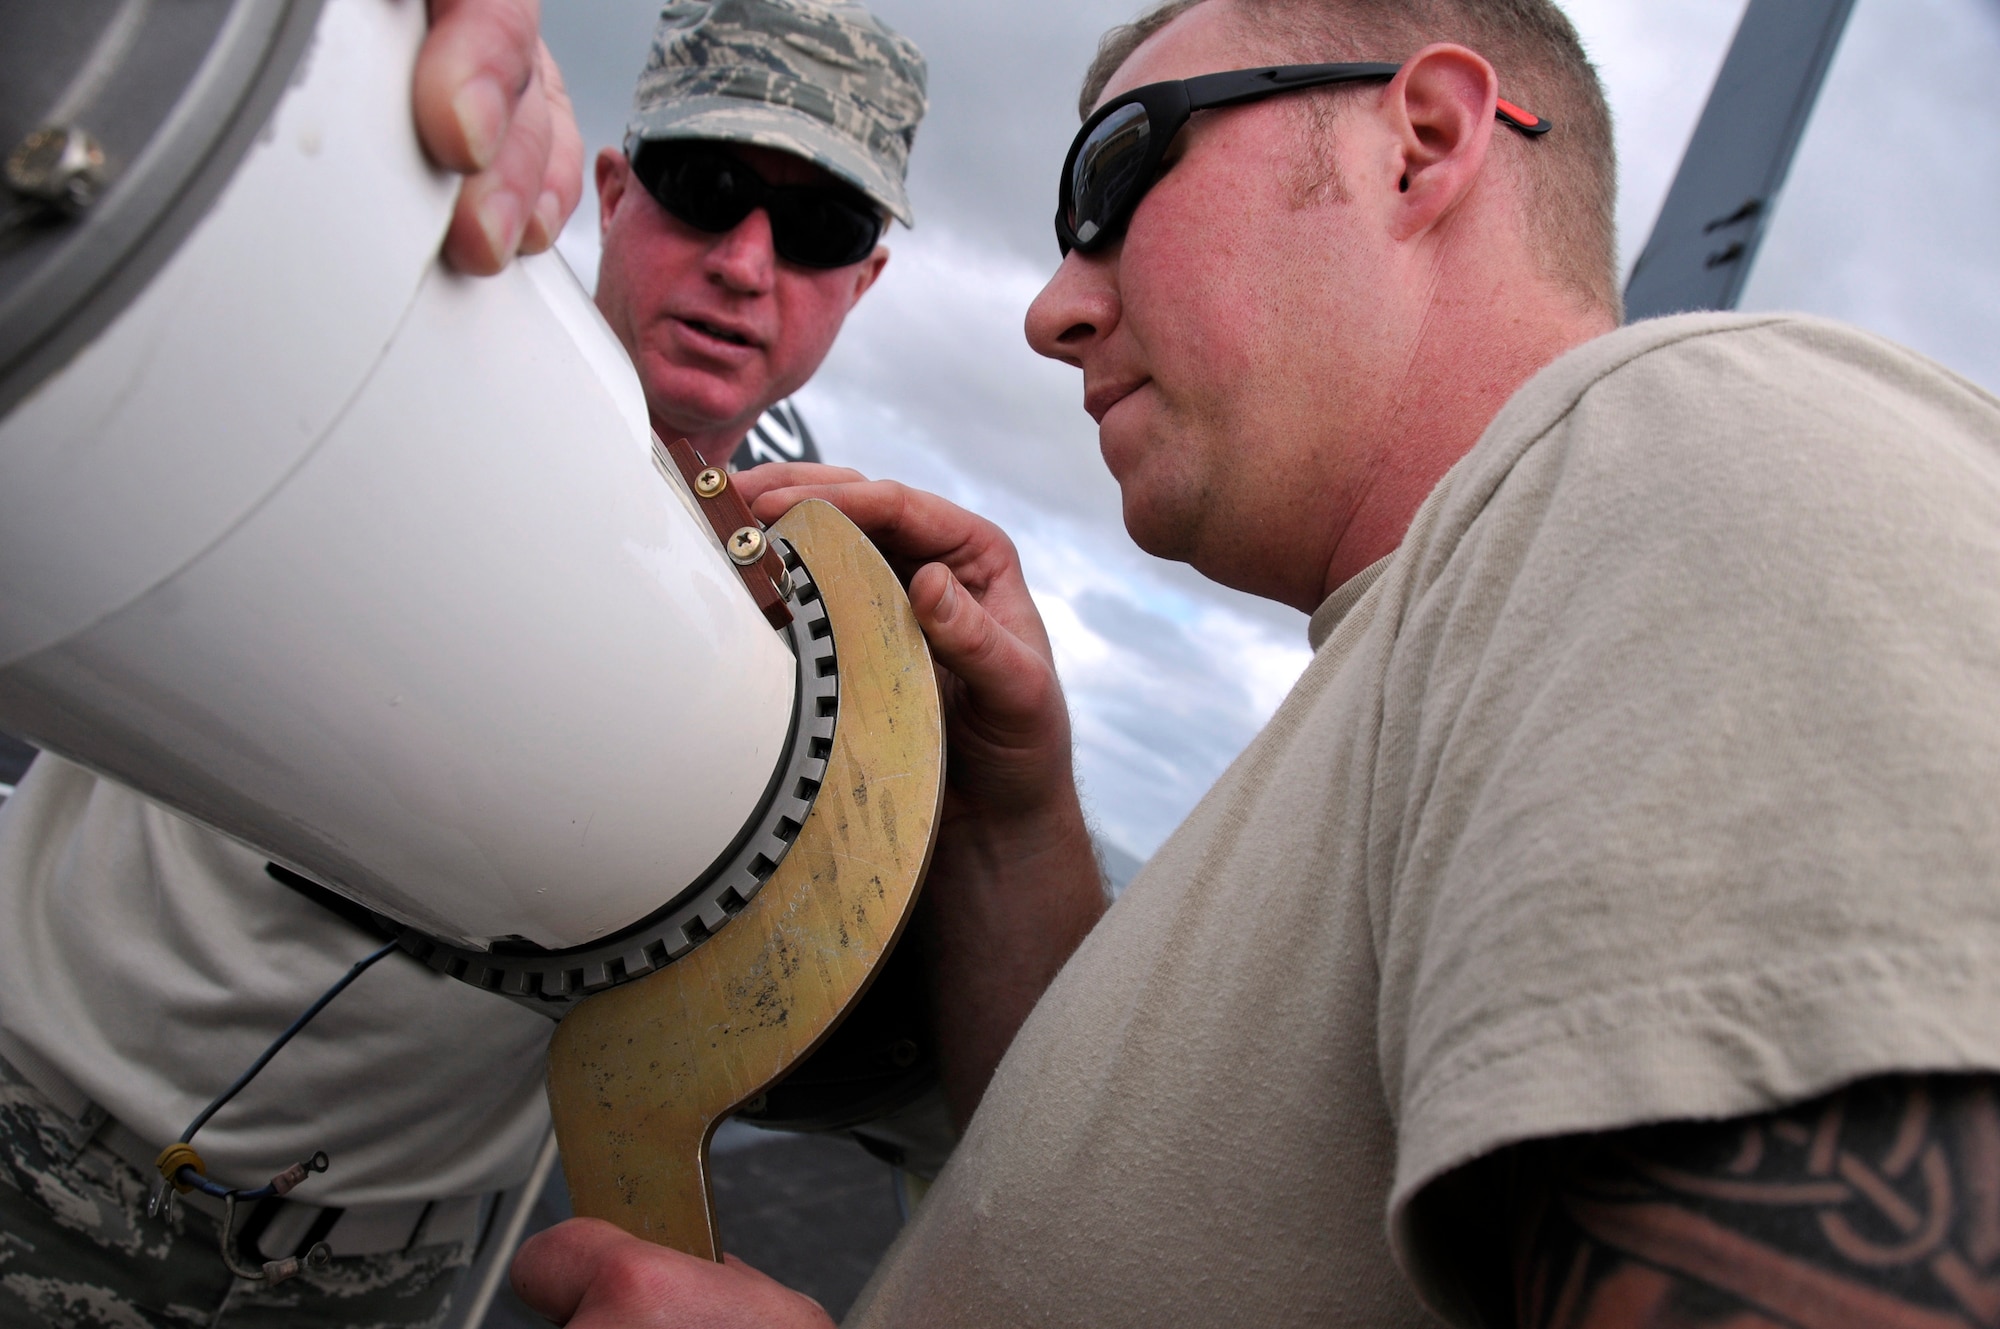 Tech. Sgt. Byron Adams(right) and Chief Master Sgt. Mark Wankum, with the 185th Air Refueling Wing (ARW), Sioux City, Iowa, Iowa Air National Guard, install a drogue on a KC-135 Tanker , which will refuel an Australian F-18 Fighter Jet, at the Royal Australian Air Force (RAFF) Base, Williamtown, New South Wales, Australia, on February 22, 2011. The 185th ARW is participating in a joint flight exercise, "Sentry Down Under", refueling F-16C and F-18 Fighter Jets in Australia.
(USAF Photo/ Tech. Sgt. Oscar M. Sanchez-Alvarez)
 
